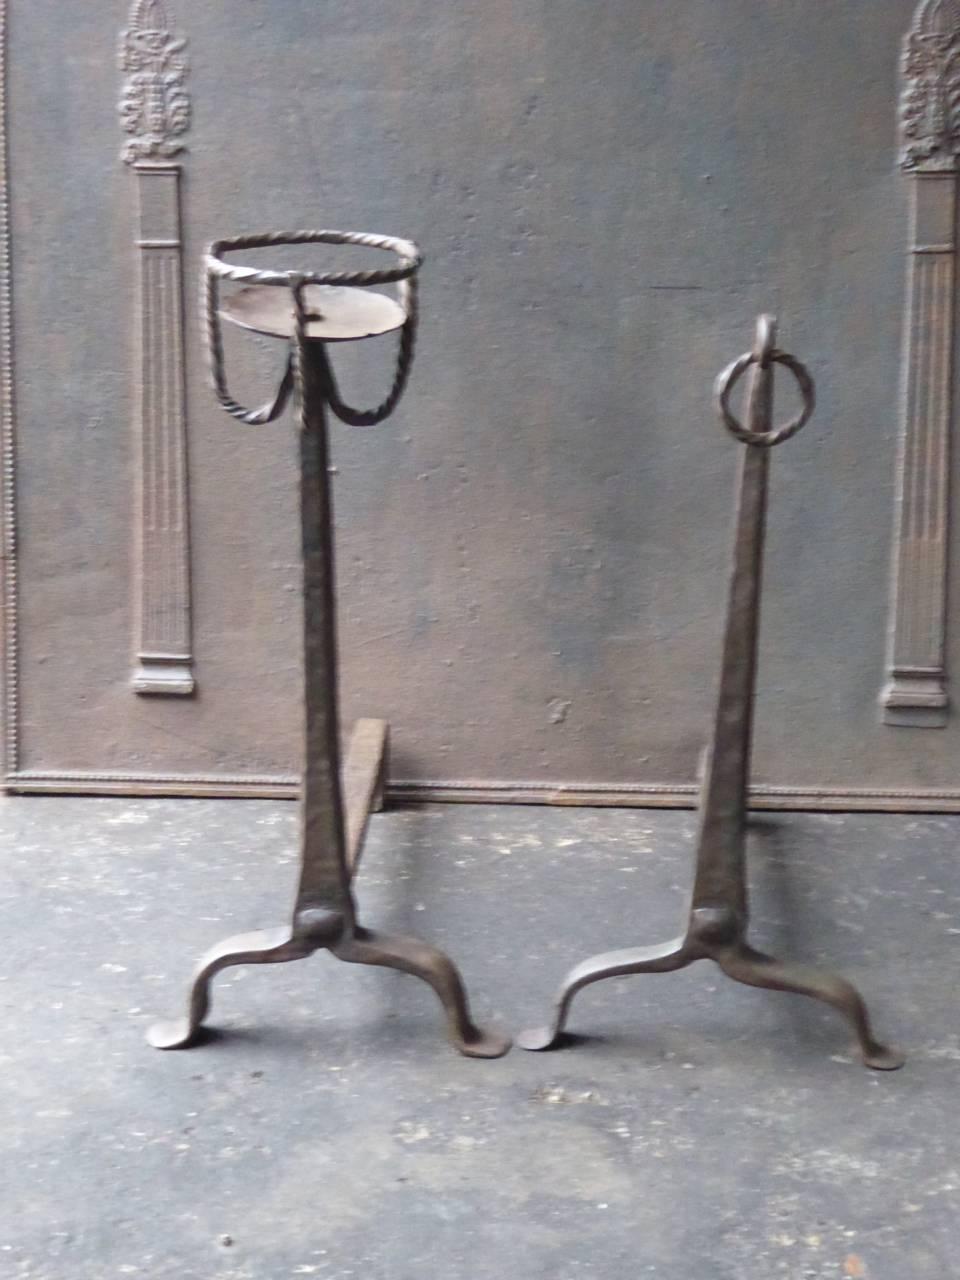 17th-18th century French Gothic fire dogs made of wrought iron. The condition is good.